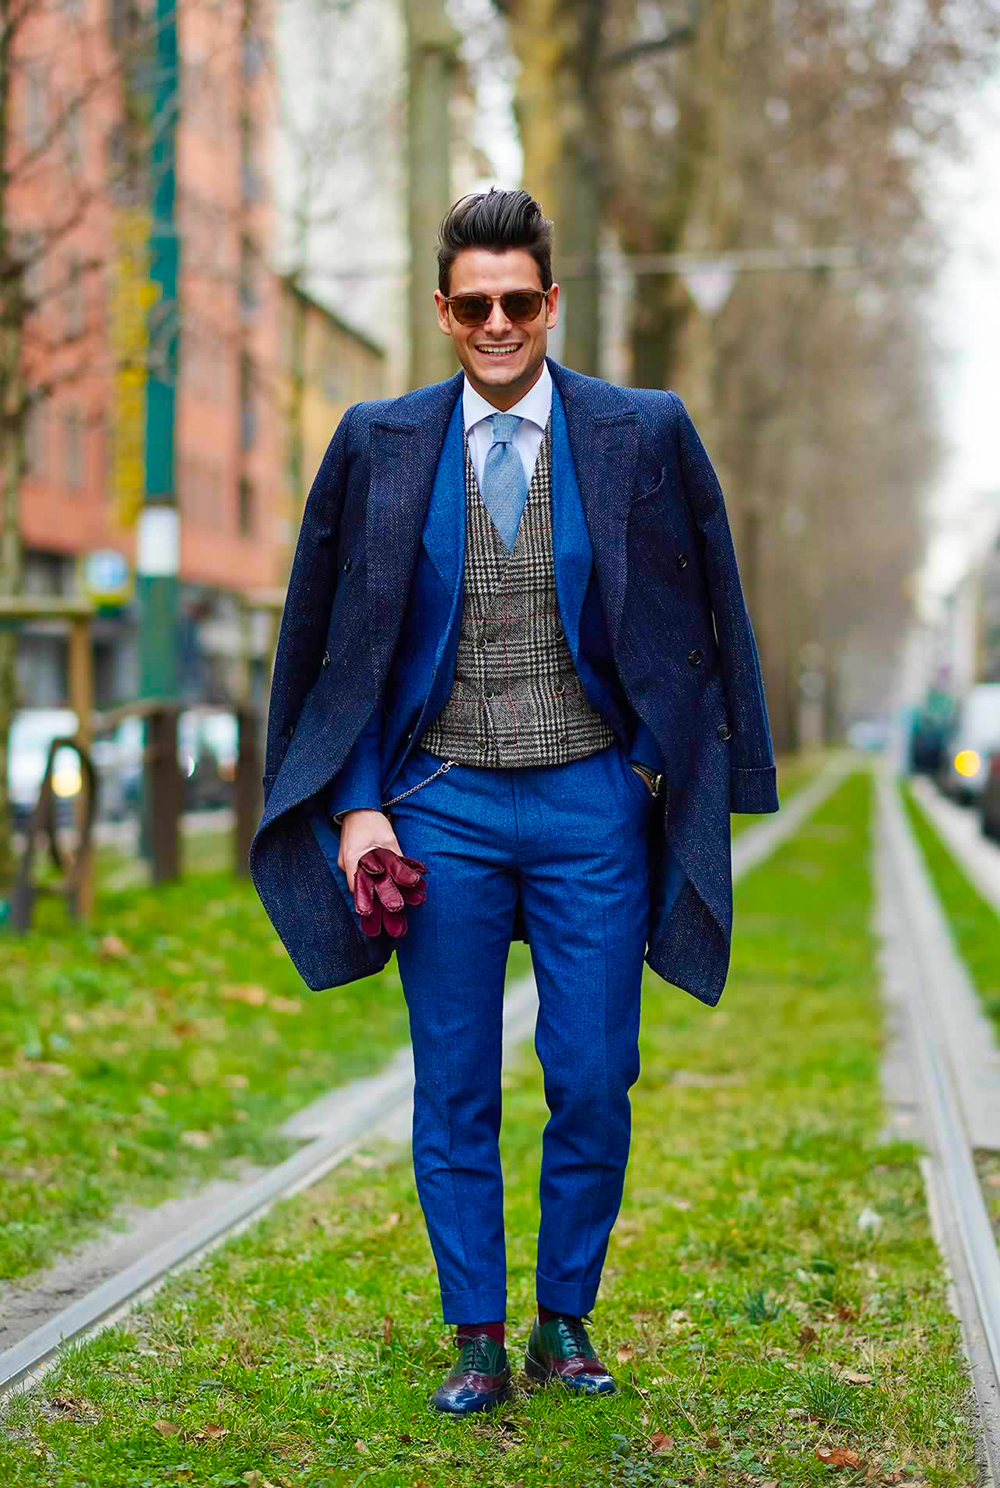 Blue suit, navy overcoat, waistcoat, and oxford shoes outfit